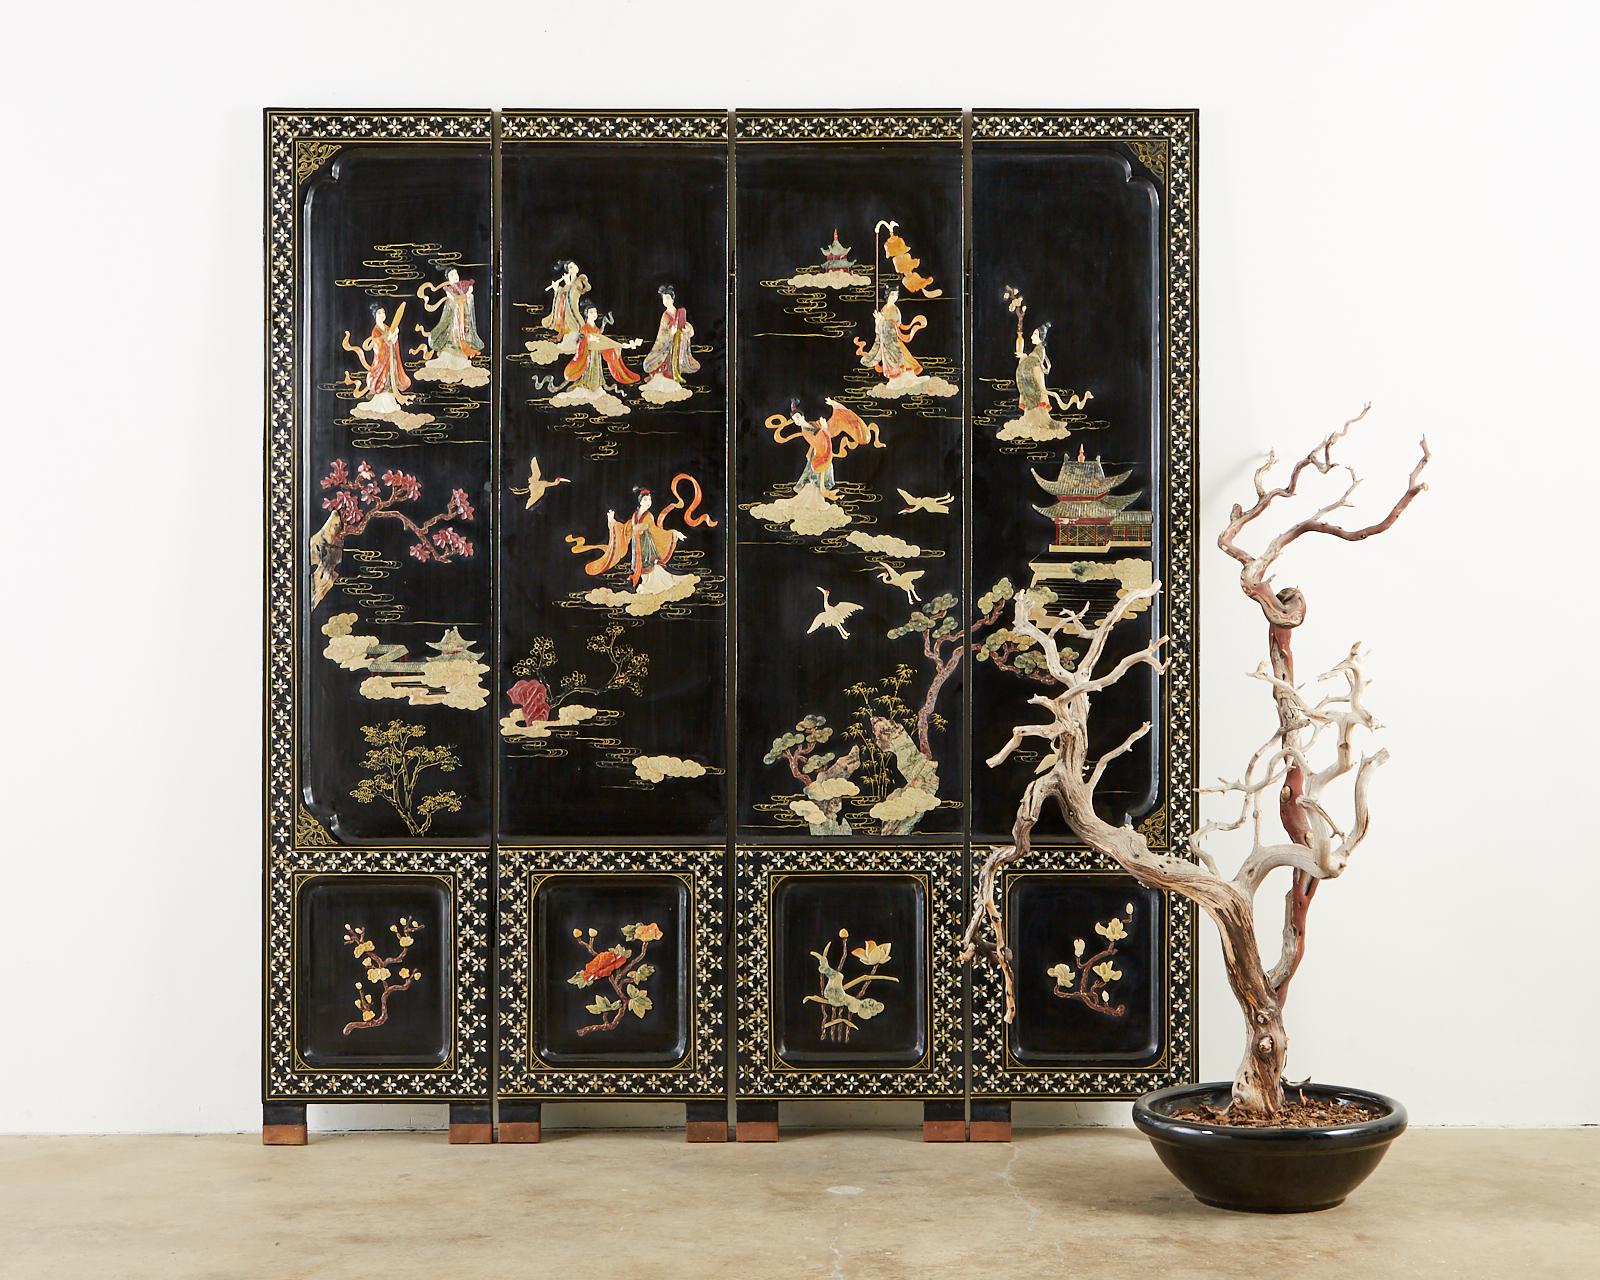 Stunning 20th century Chinese export four-panel lacquered Coromandel screen featuring hand carved soapstone beauties in a floral, pagoda landscape. The highly decorative screen has recessed borders which showcase intricate mother of pearl inlay and